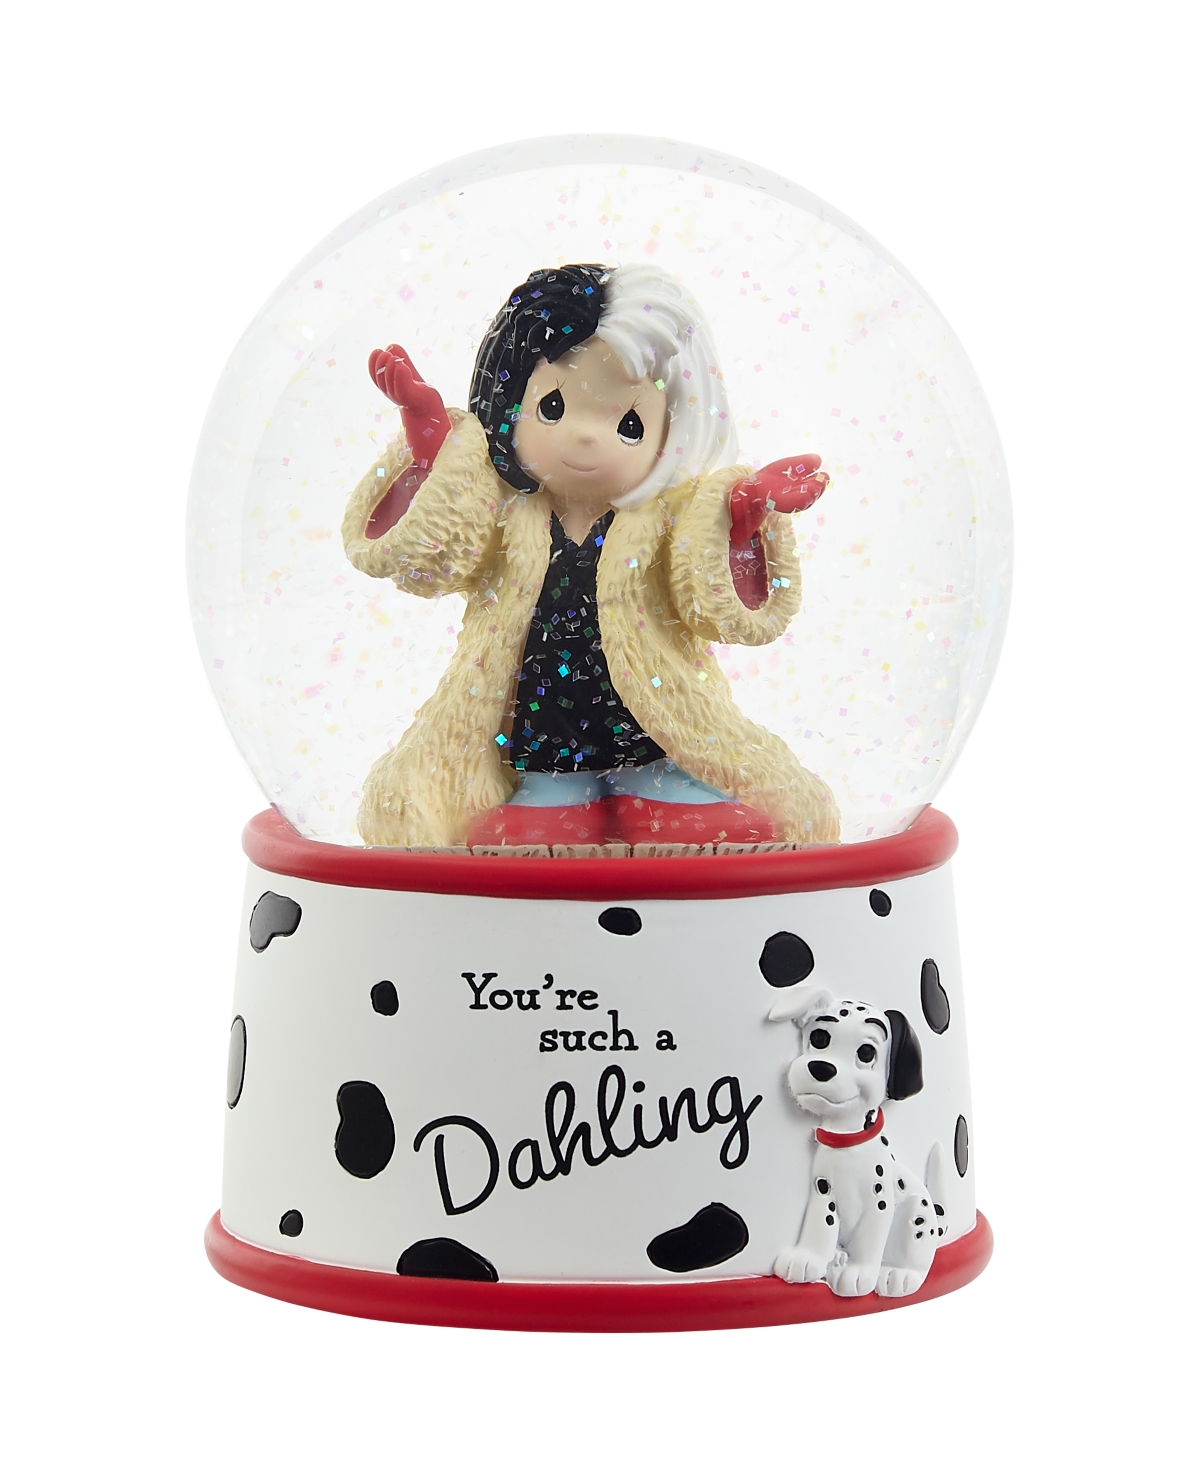 221109 You're such a Dahling Resin, Glass Musical Snow Globe - Multicolor